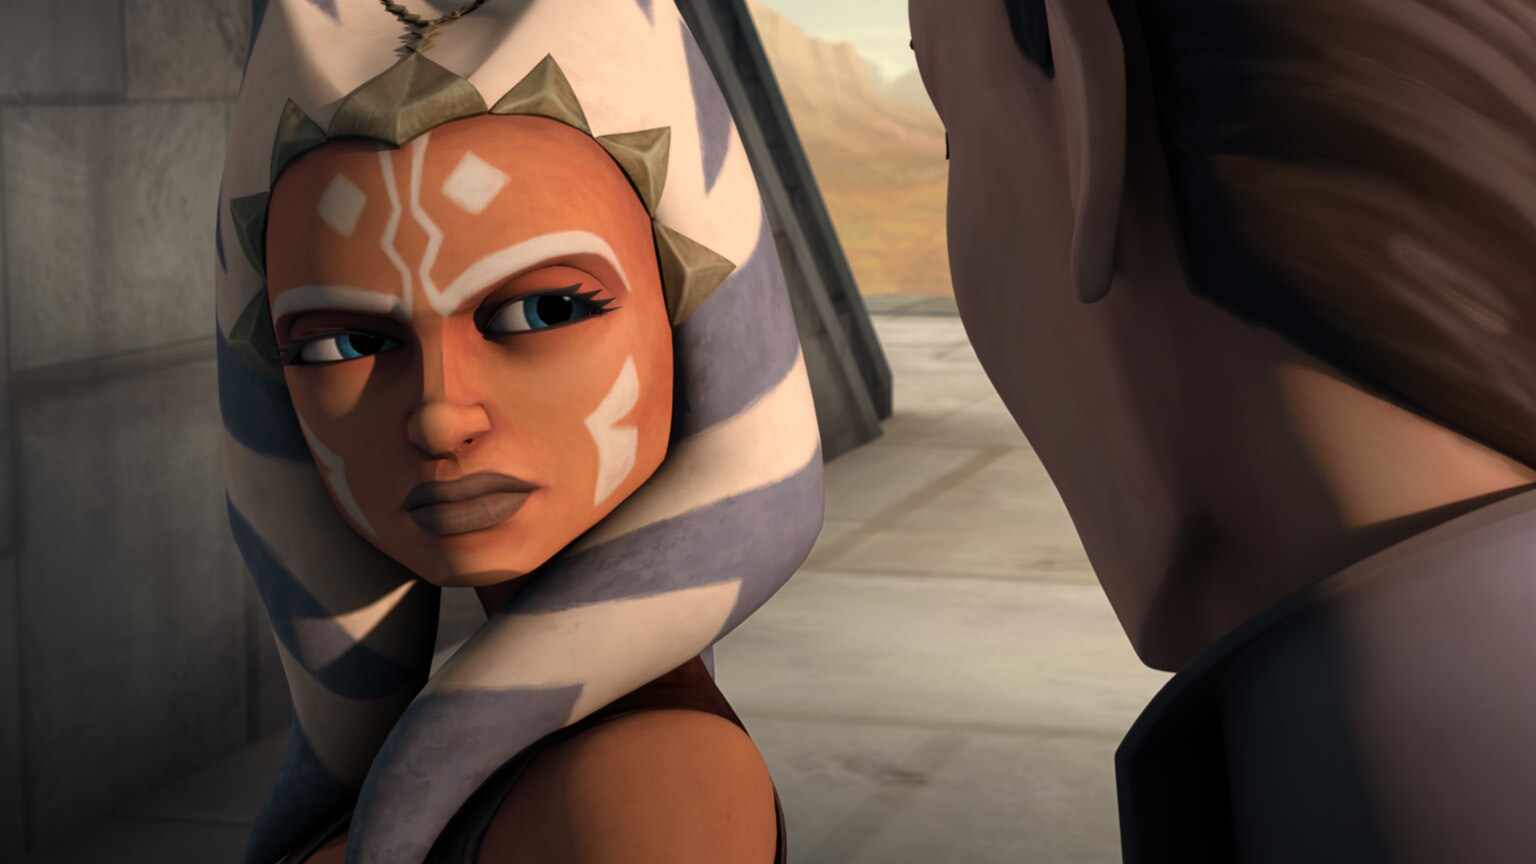 The Clone Wars Rewatch: A War with "Heroes on Both Sides"